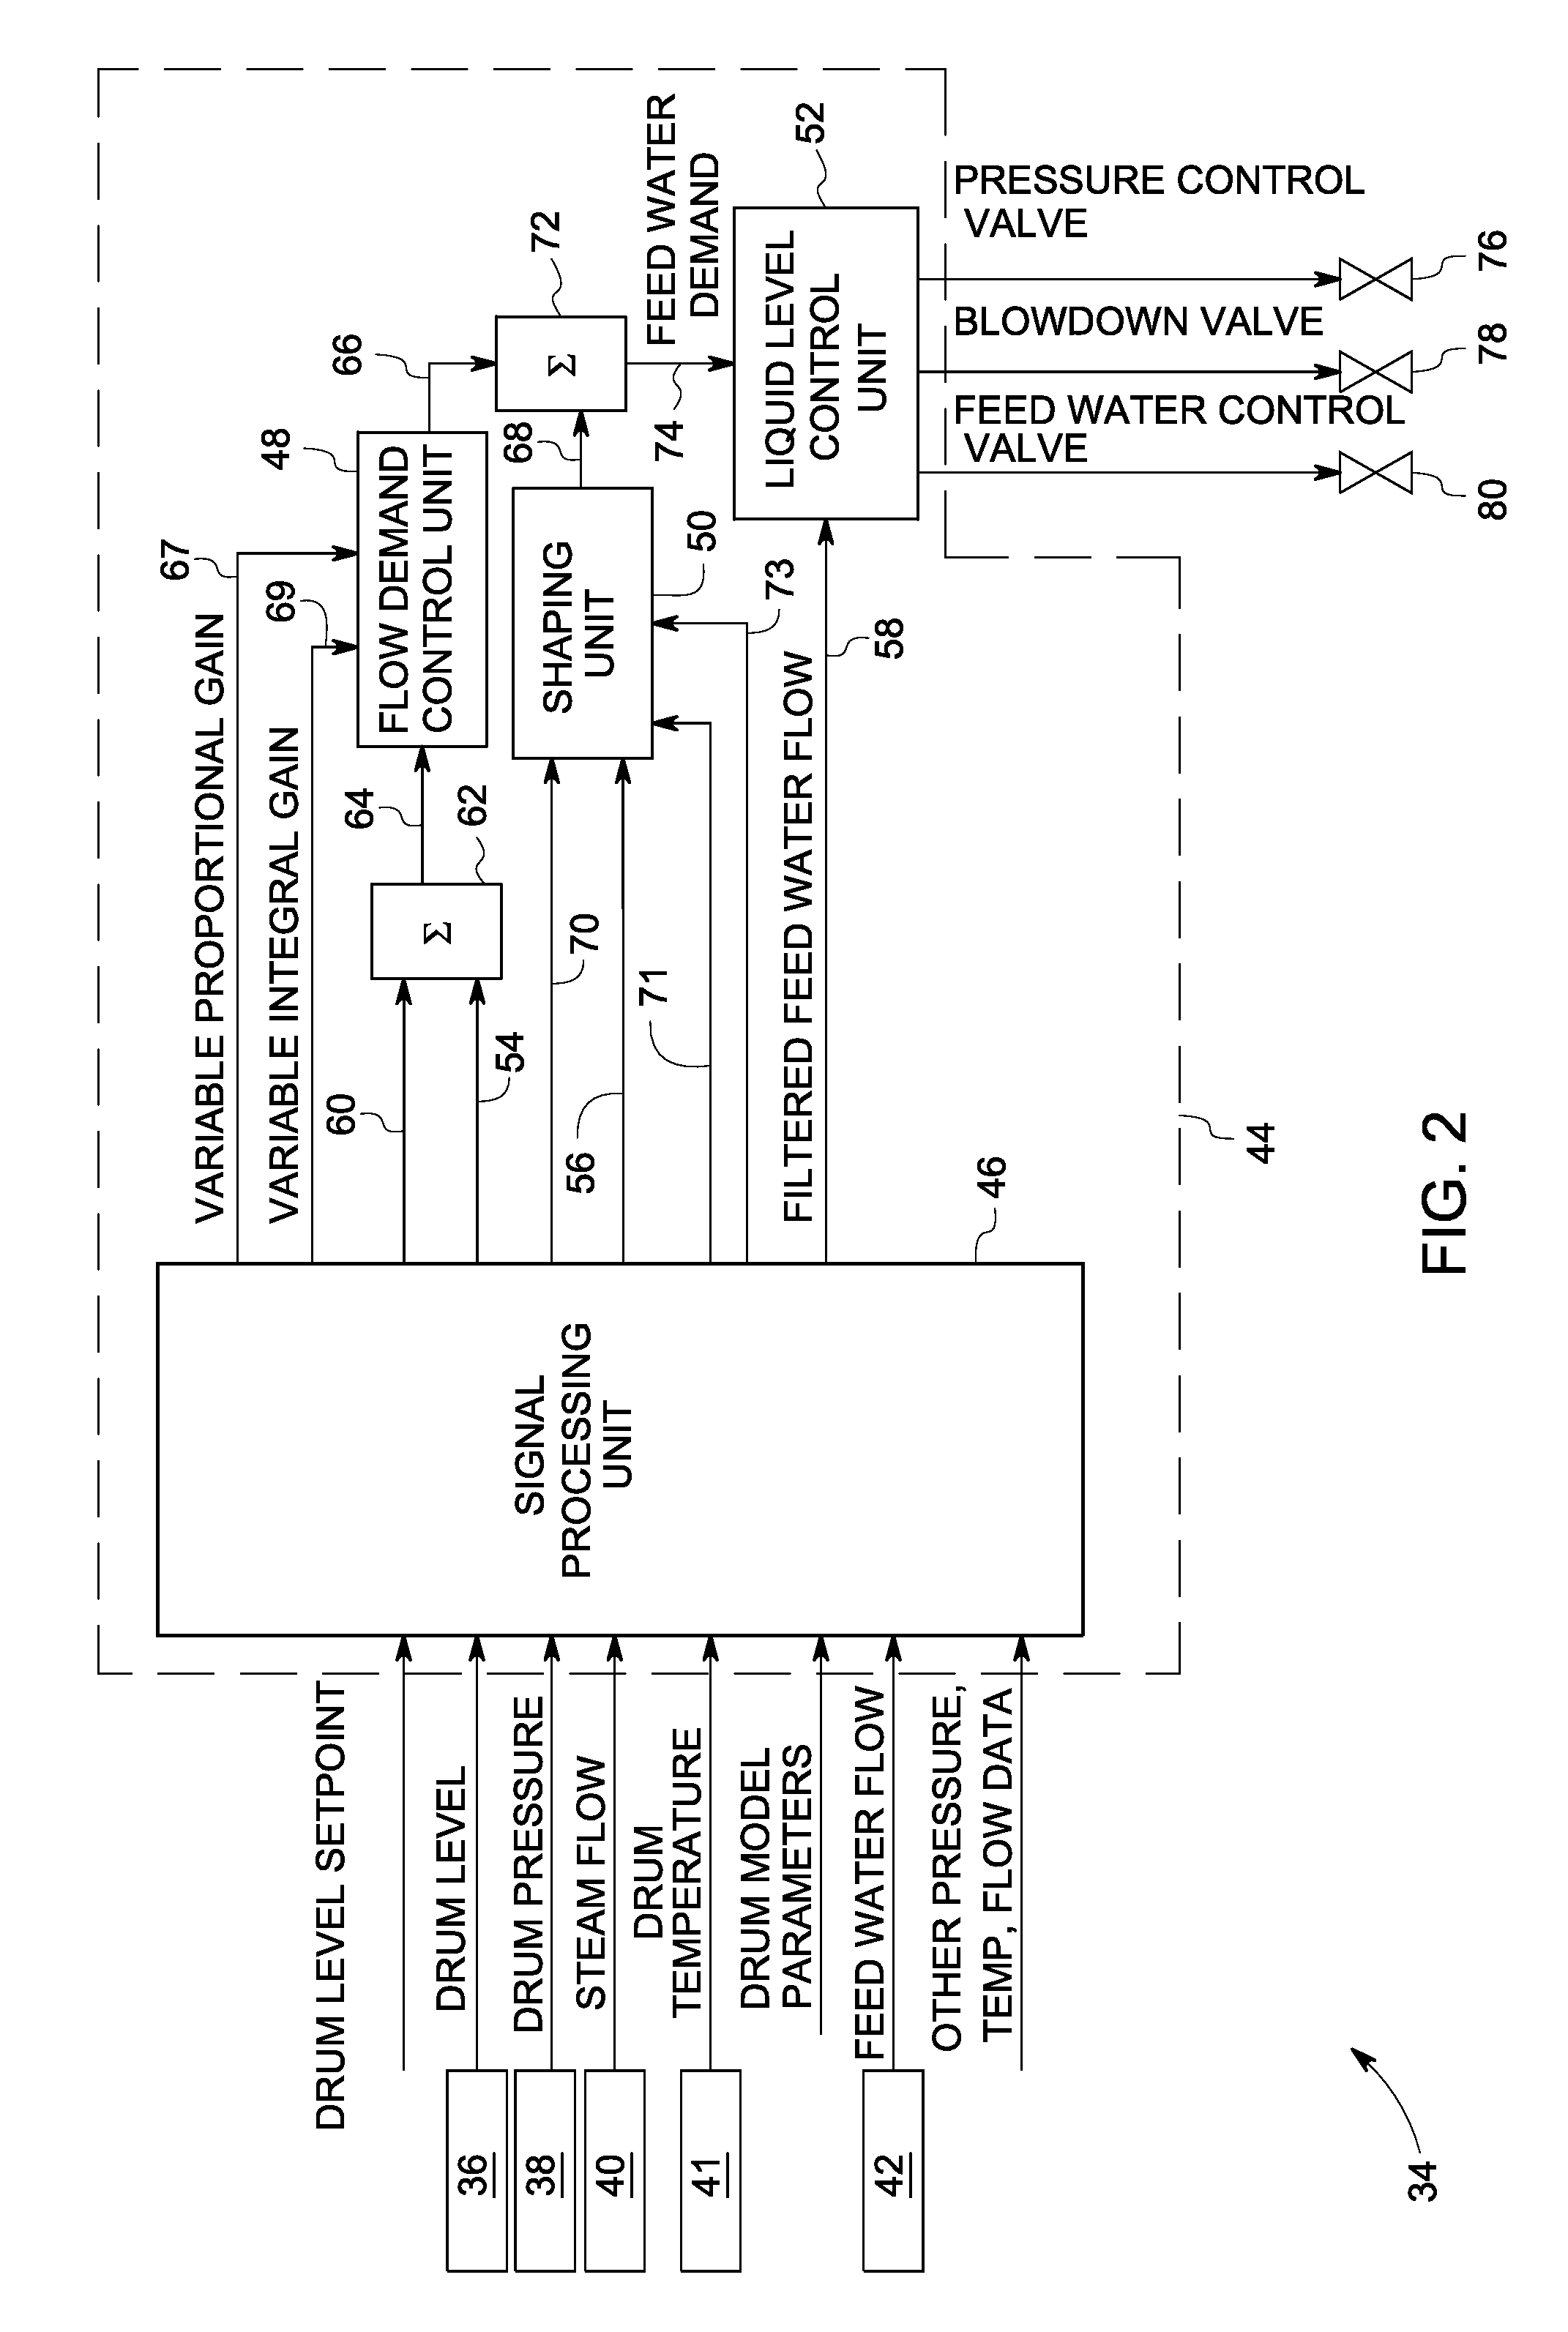 System and method for controlling liquid level in a vessel